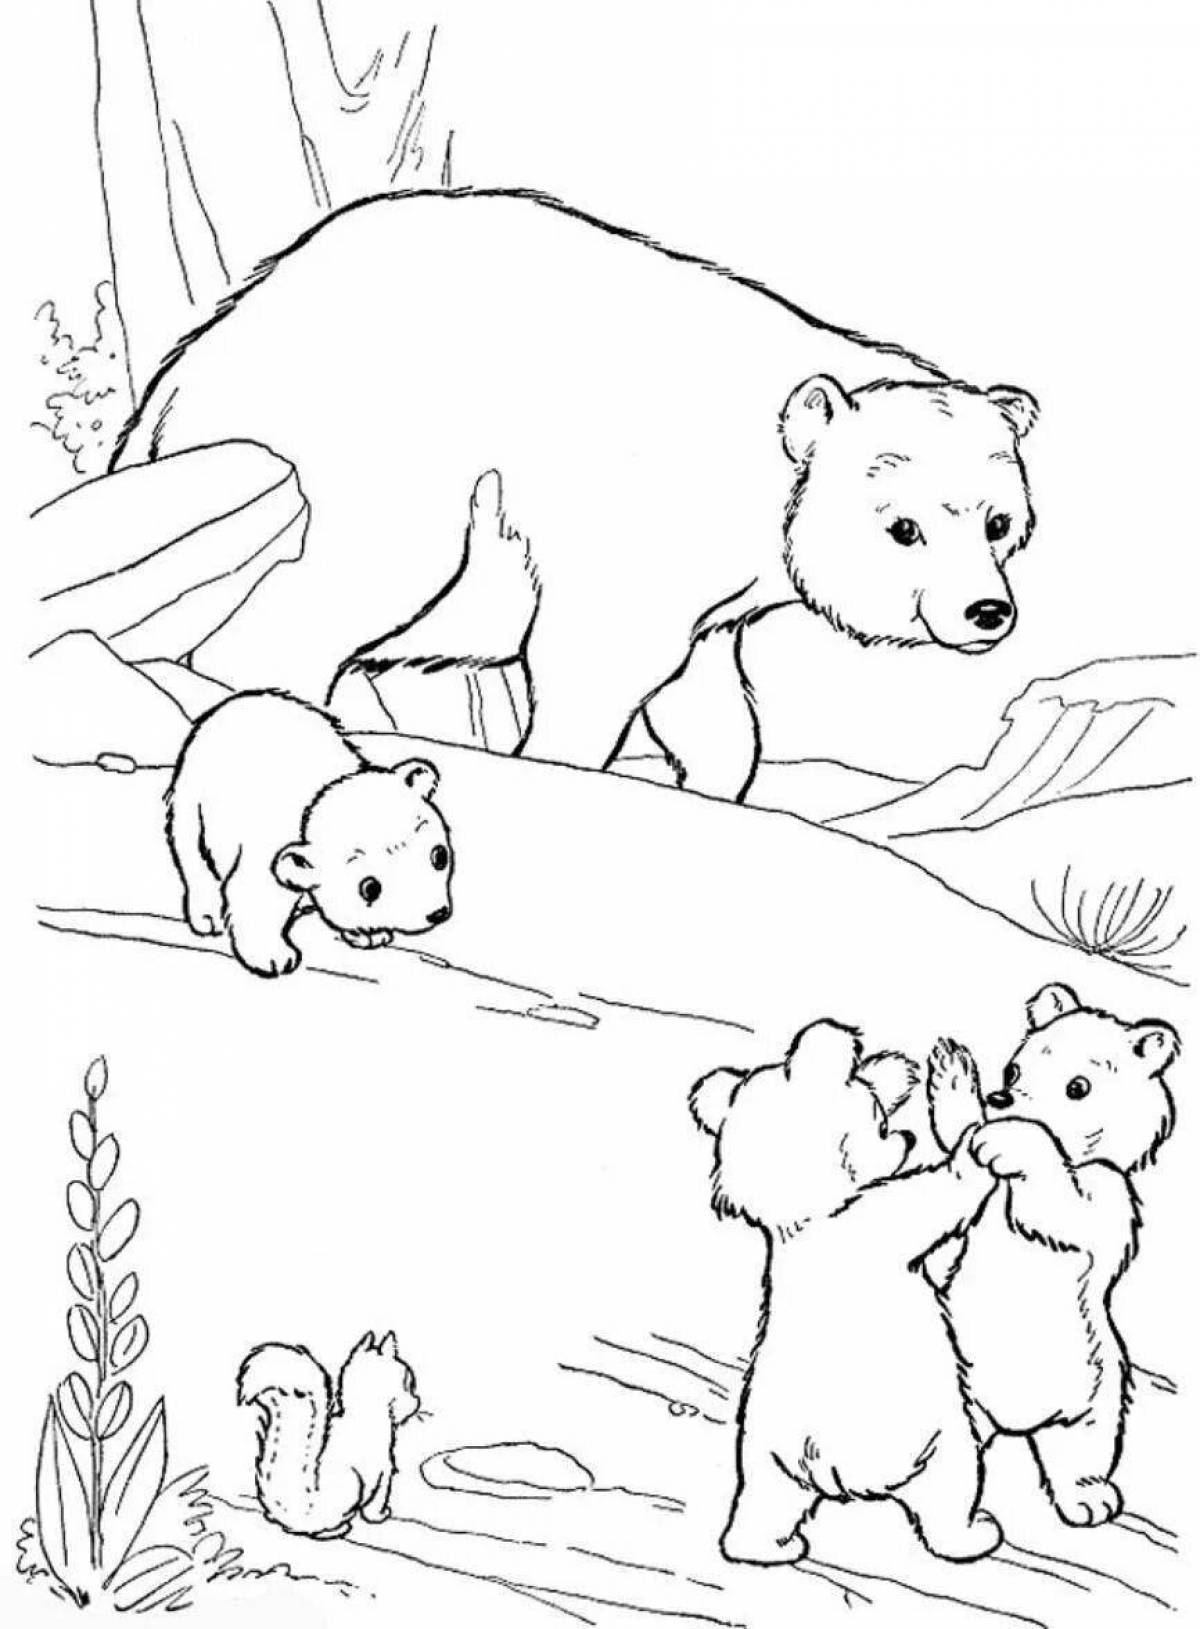 Playful bear family coloring page